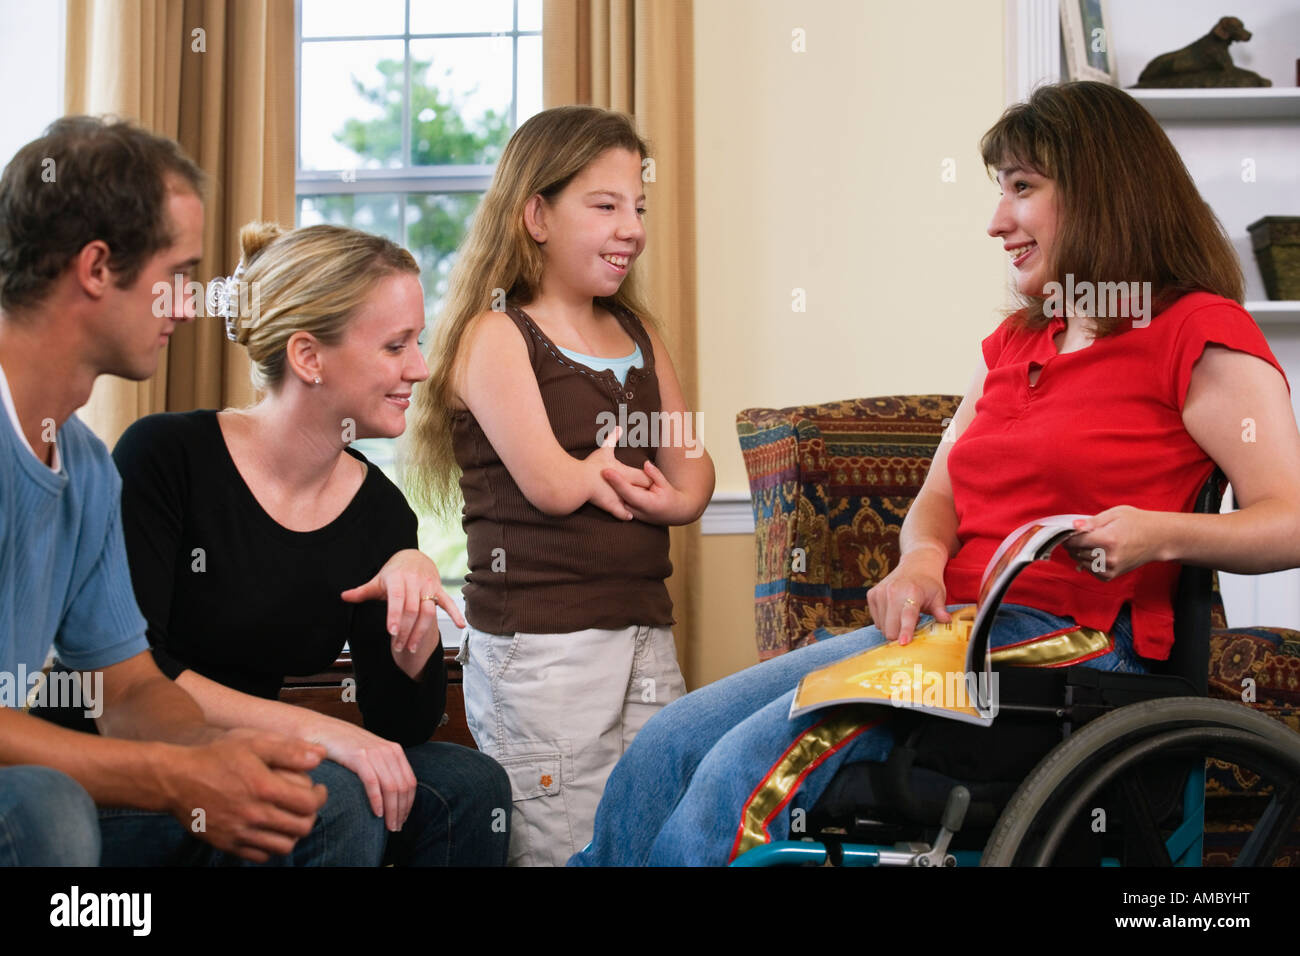 A happy family sitting together with hand deformity, wheelchair and signing. Stock Photo